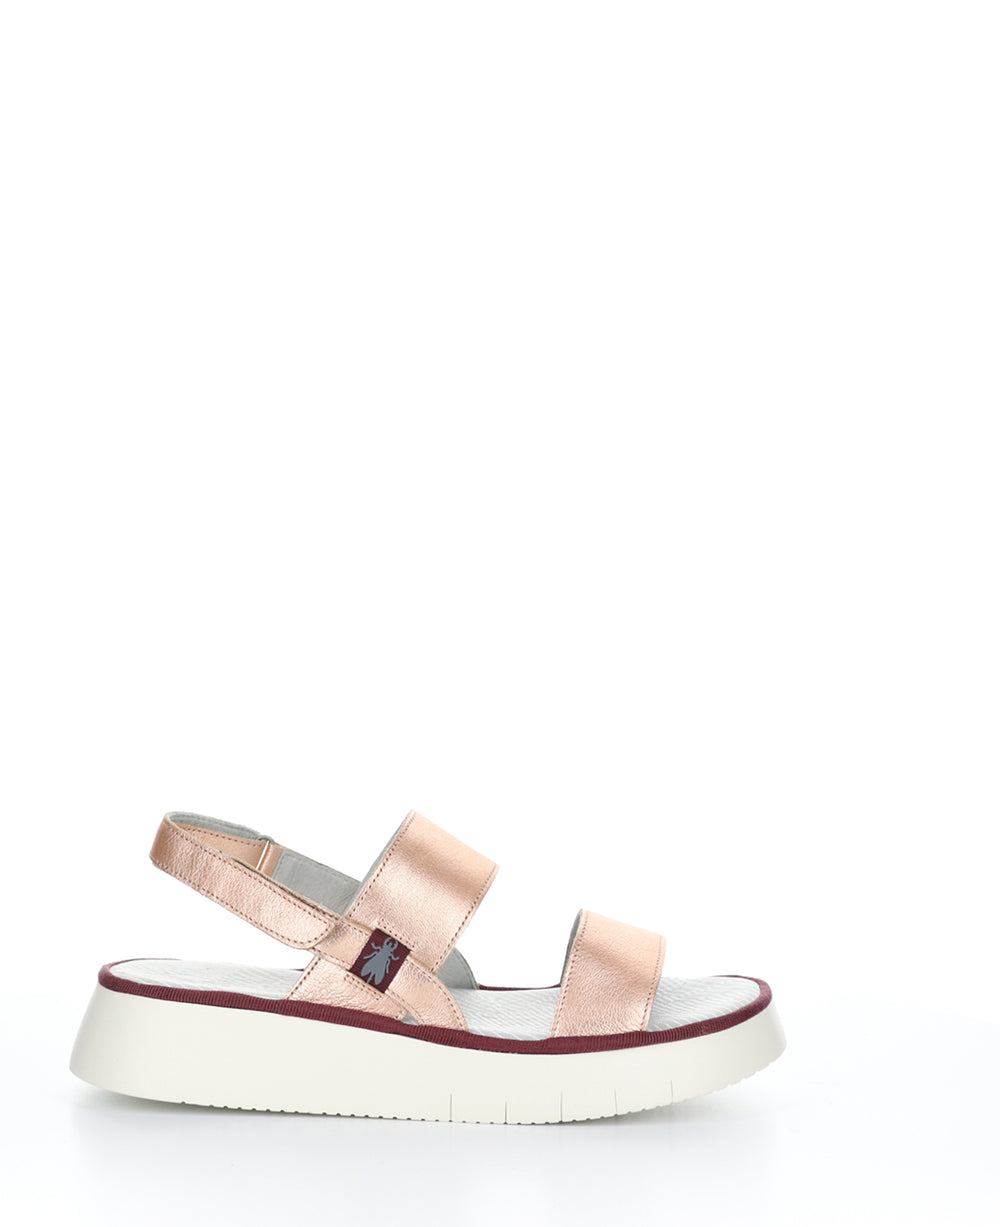 CURA318FLY BLUSH GOLD Wedge Sandals|CURA318FLY Chaussures à Bout Rond in Rose Or